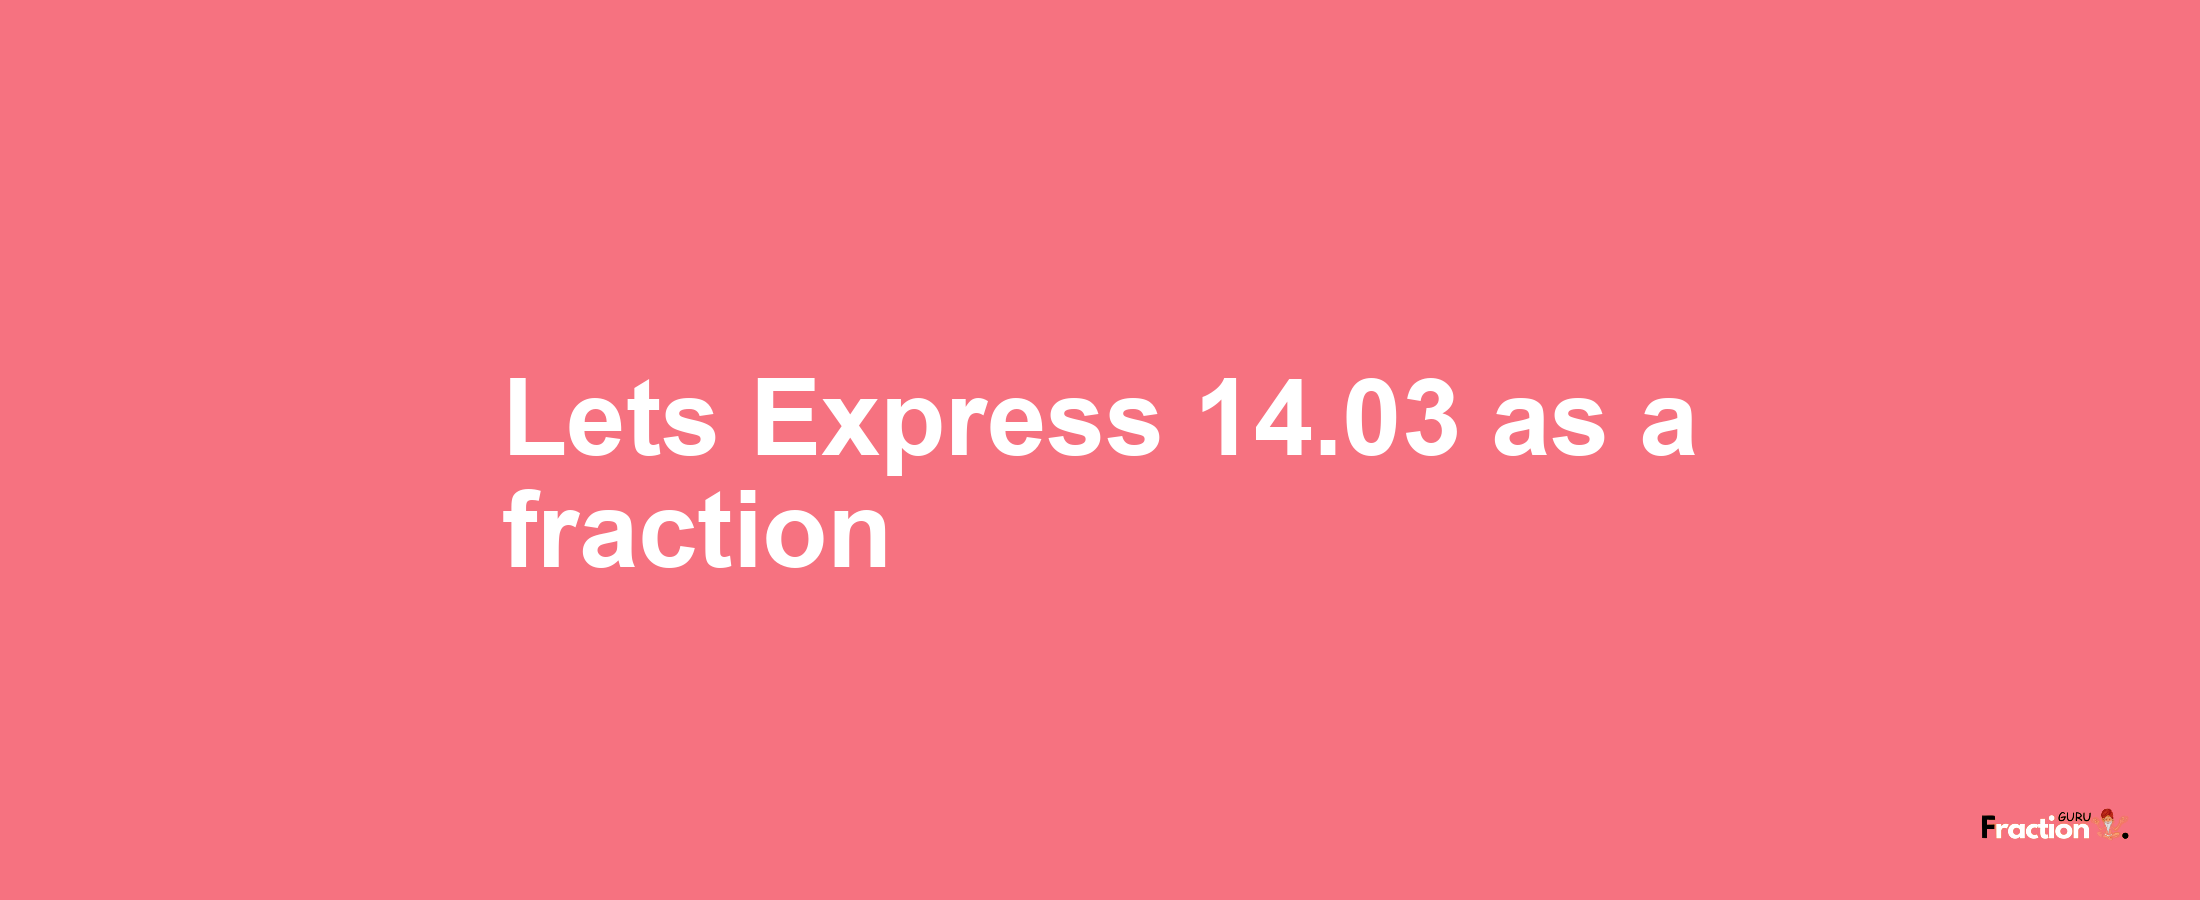 Lets Express 14.03 as afraction